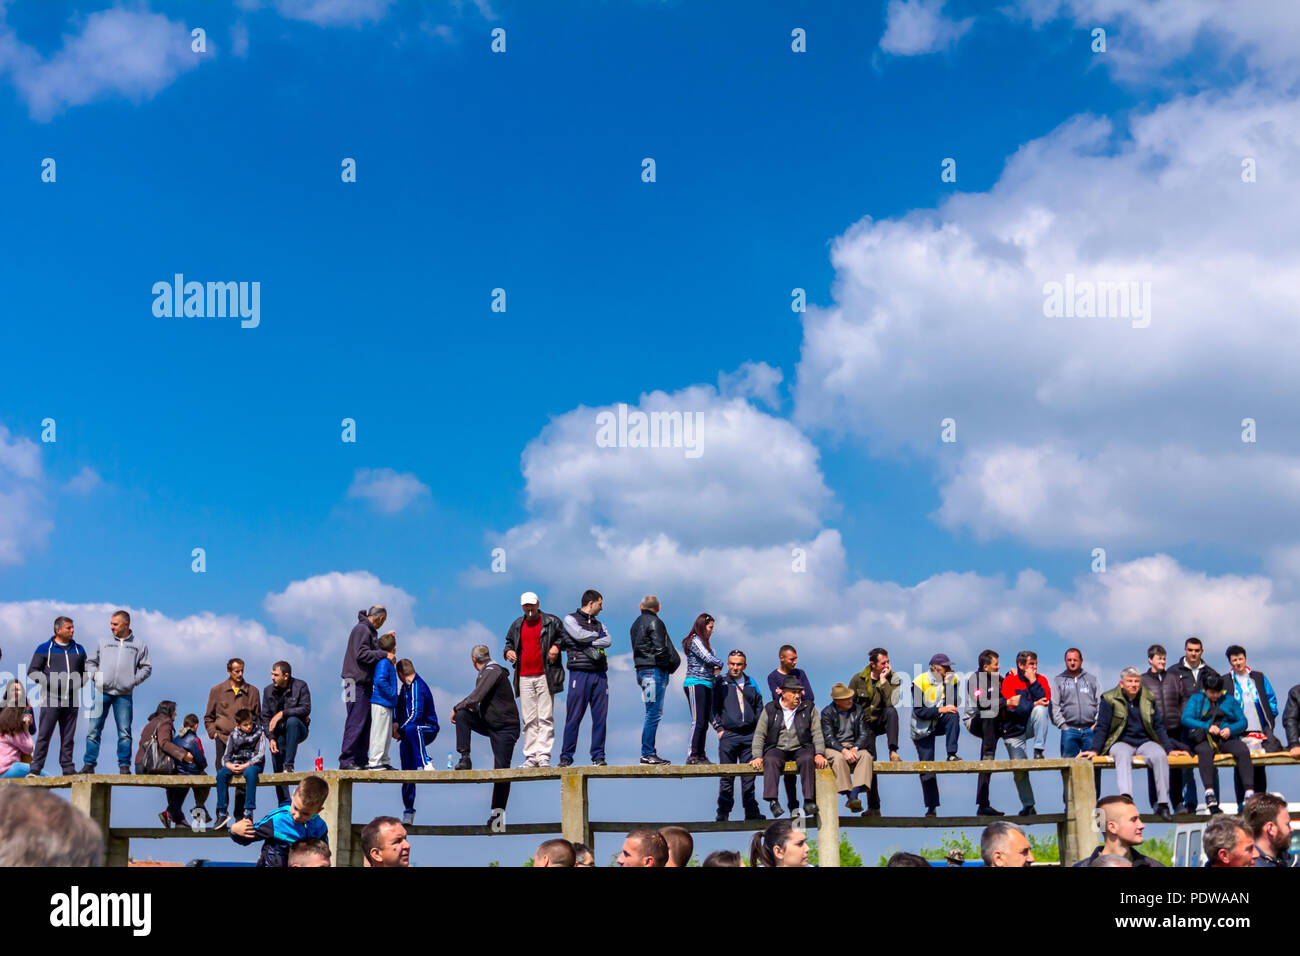 Chestereg, Vojvodina, Serbia - April 30, 2017: Group of people, mostly men is gathered on public happening. Fans are standing on grandstand for better Stock Photo